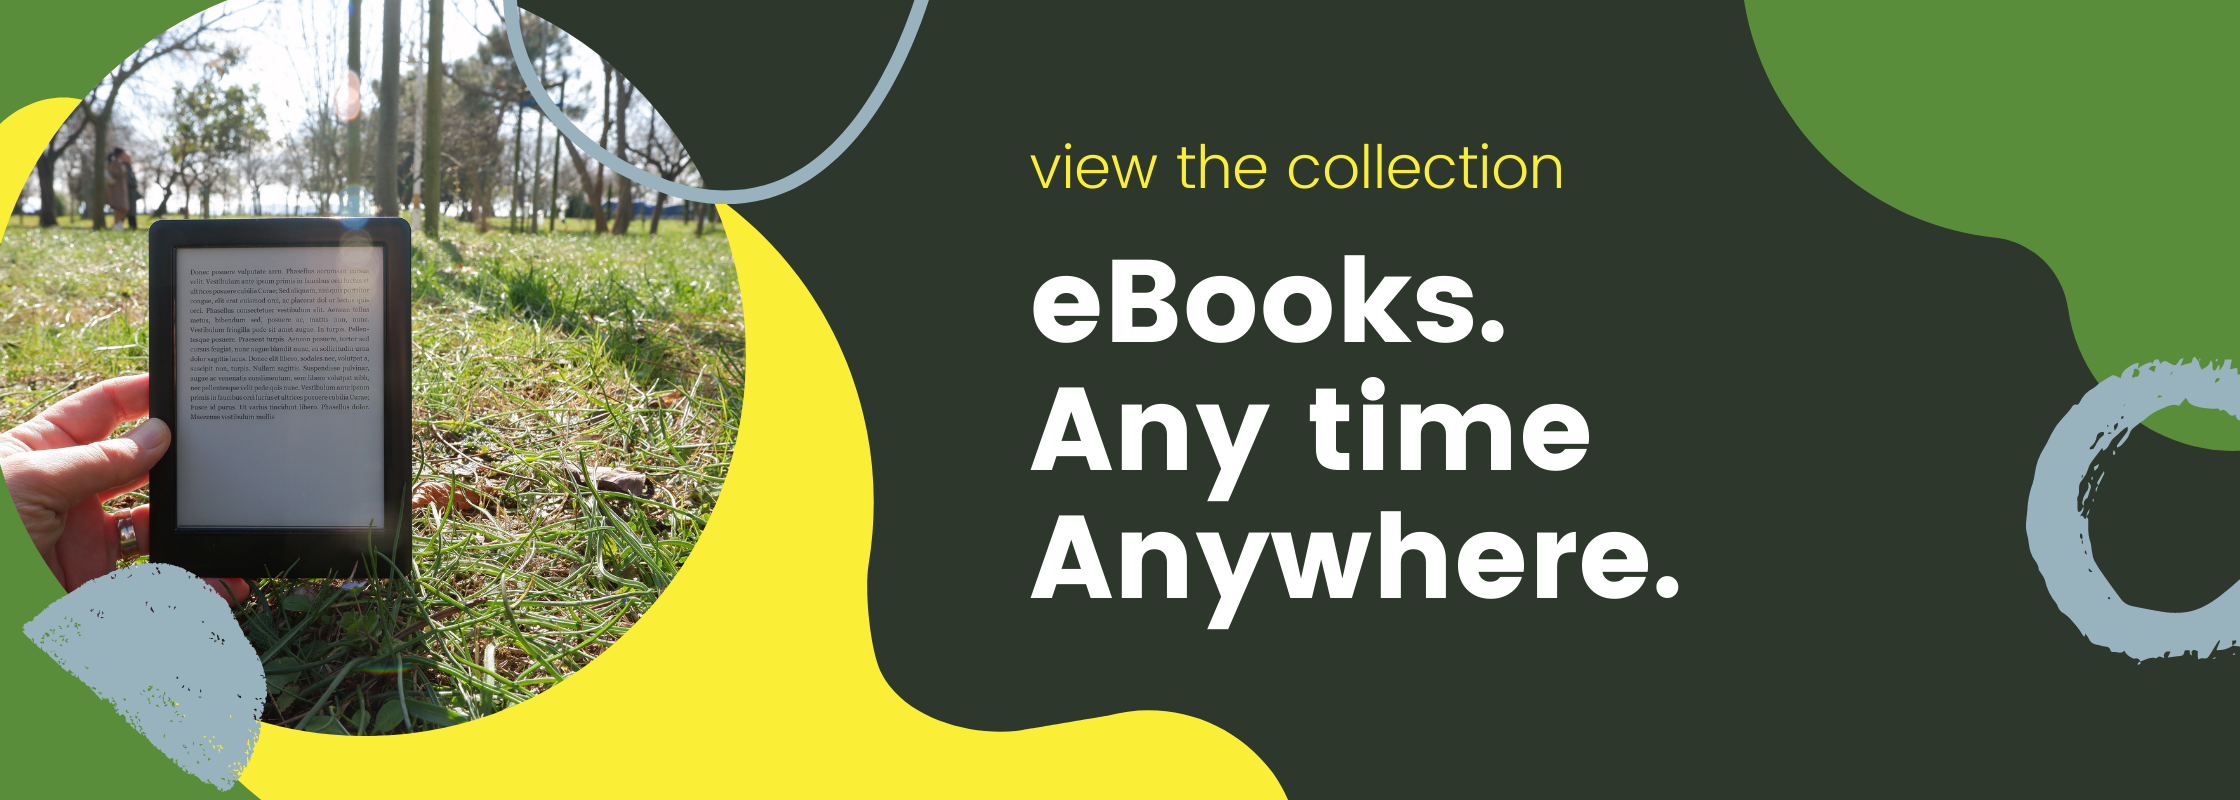 ebooks. Any time. Anywhere. View the collection